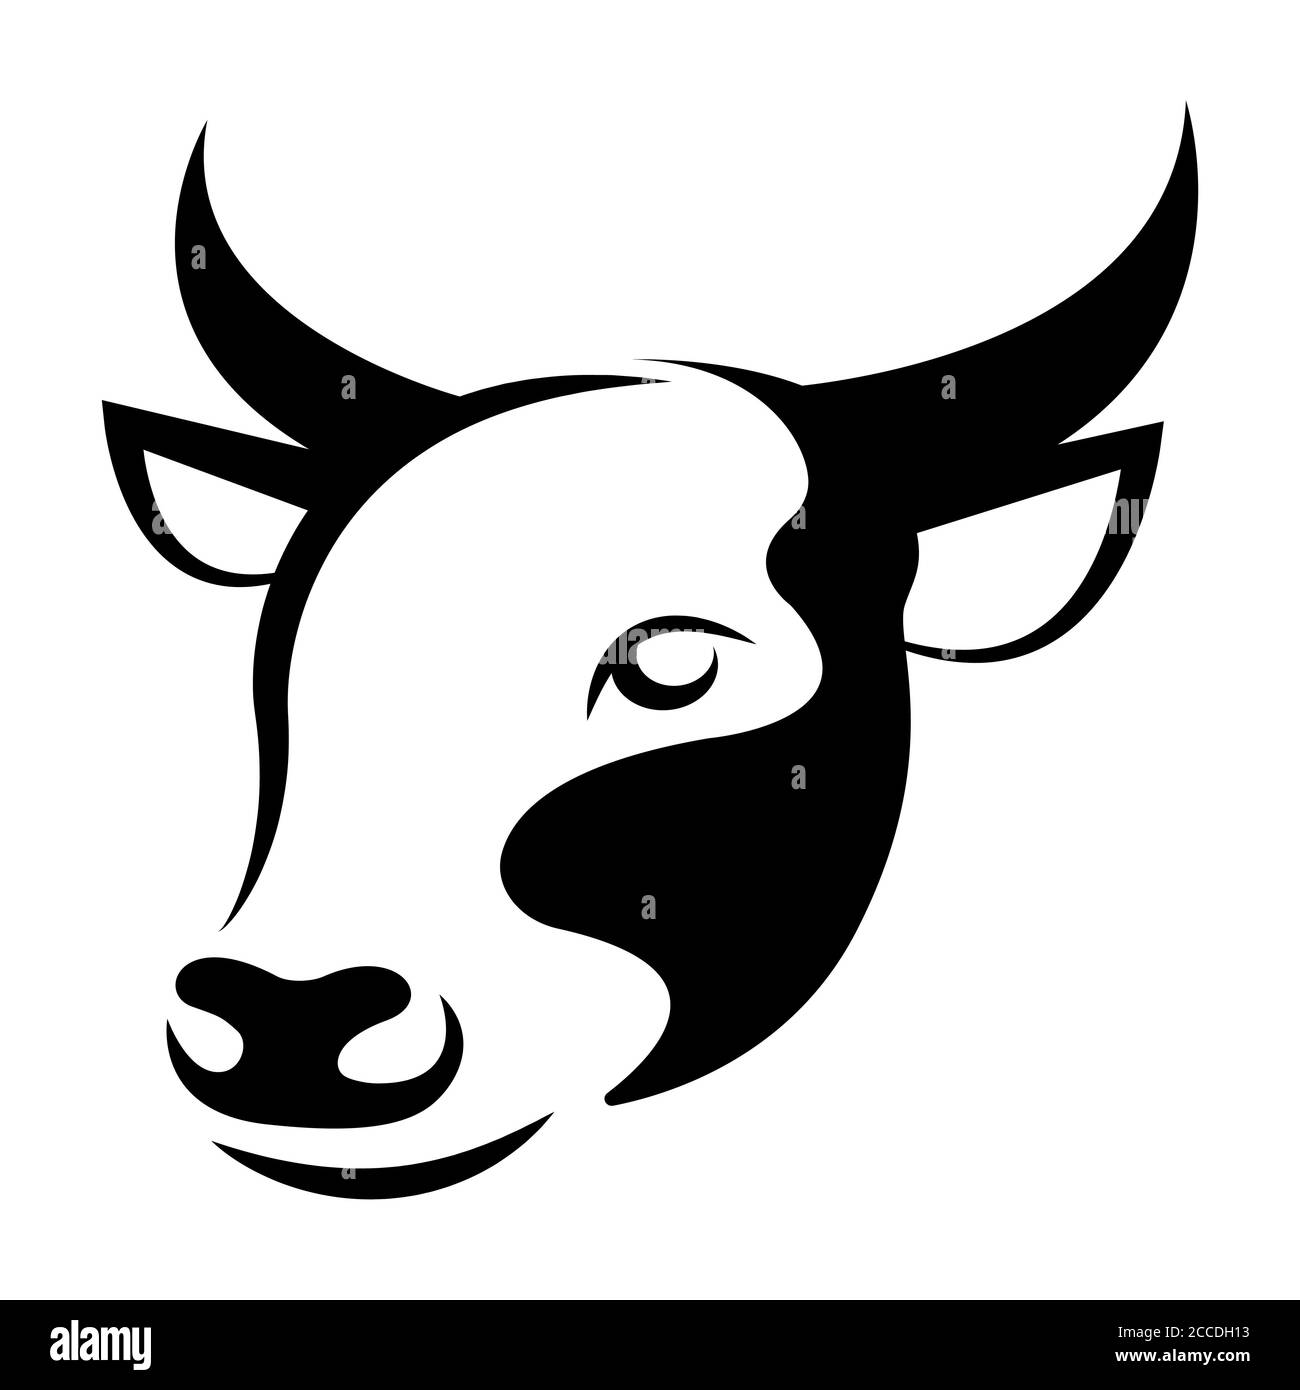 Bull zodiac sign isolated on white background. Happy Chinese new year 2021. Vector illustration. EPS 10. Stock Vector